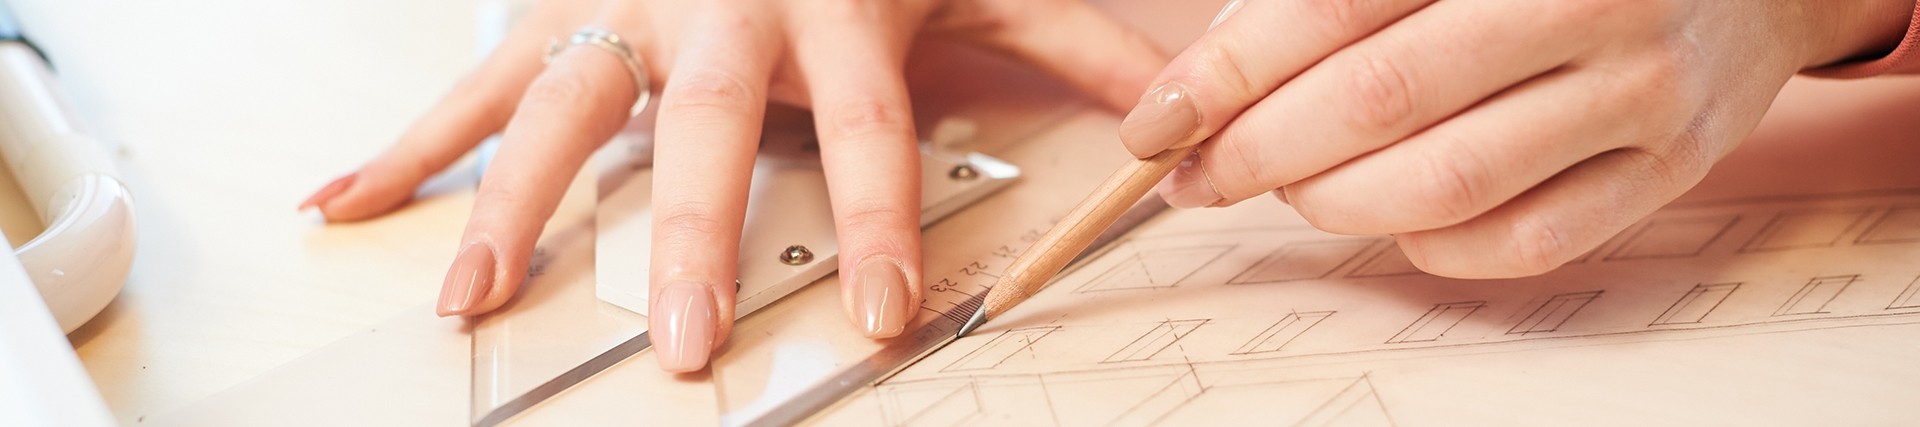 Manicured fingers hold an angle protractor and sharp pencil to draw a line on an architectural design. 